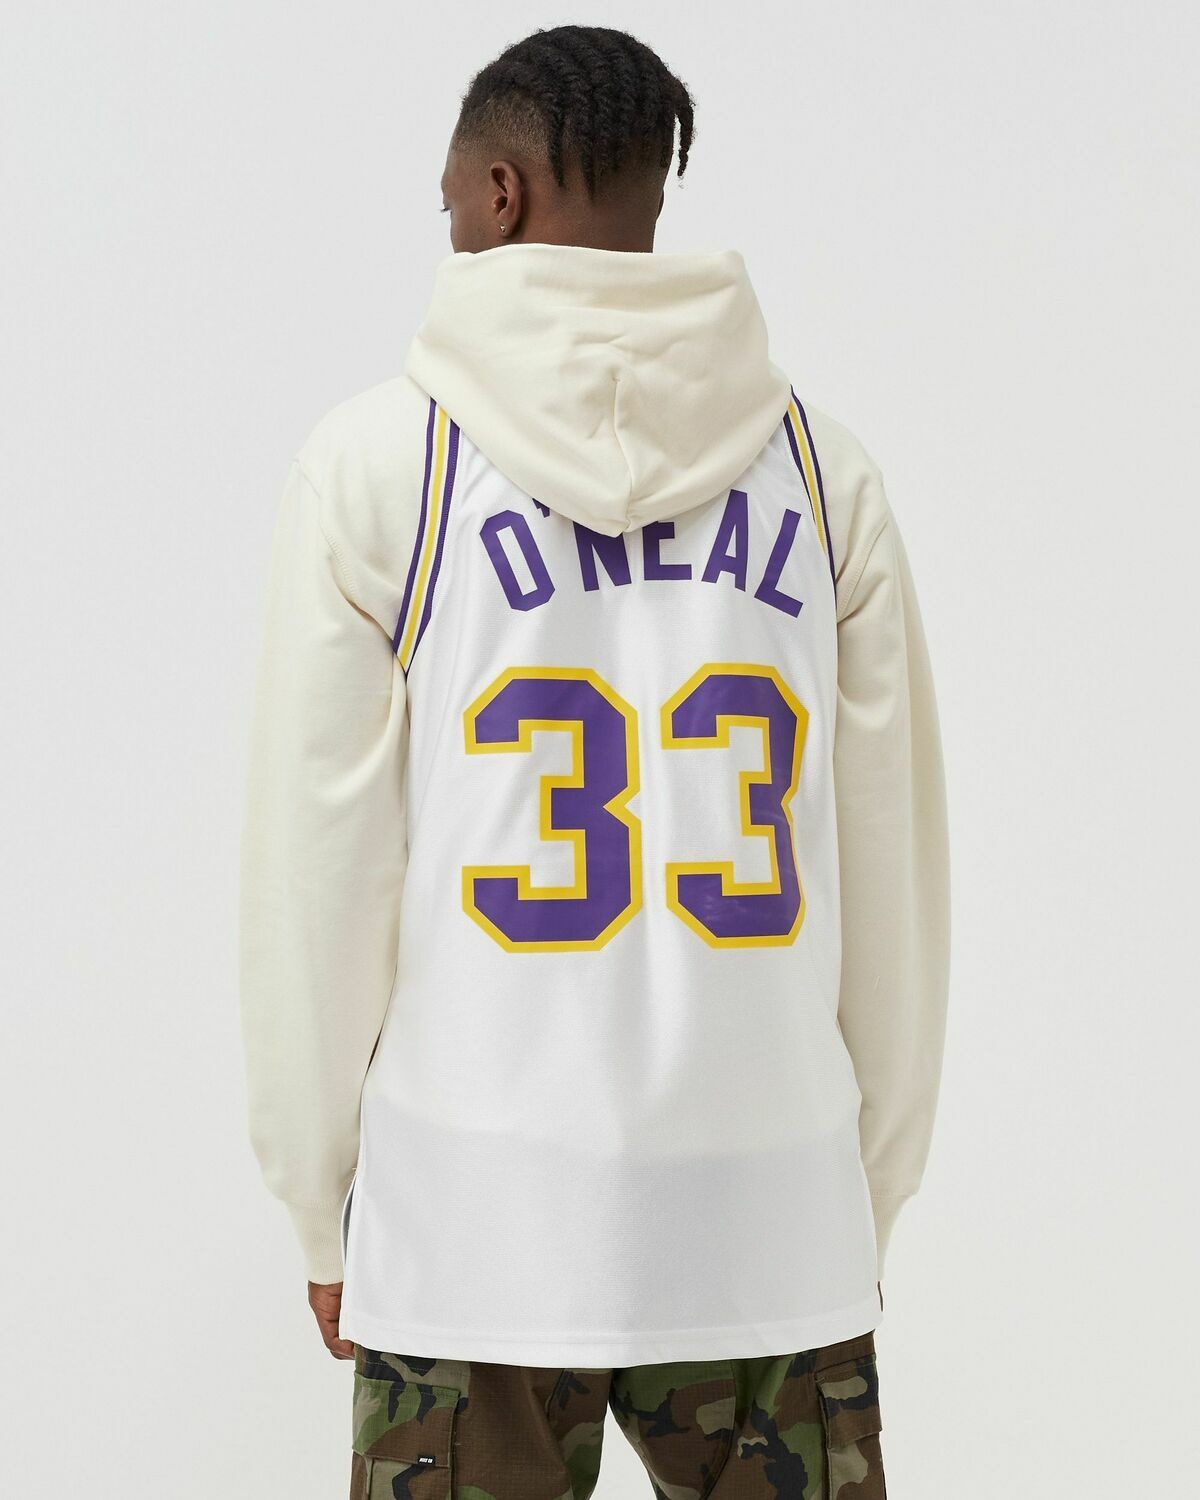 Mitchell & Ness Ncaa Authentic Jersey Louisana State University 1990 31 Shaquille O´Neal #33 White - Mens - Jerseys